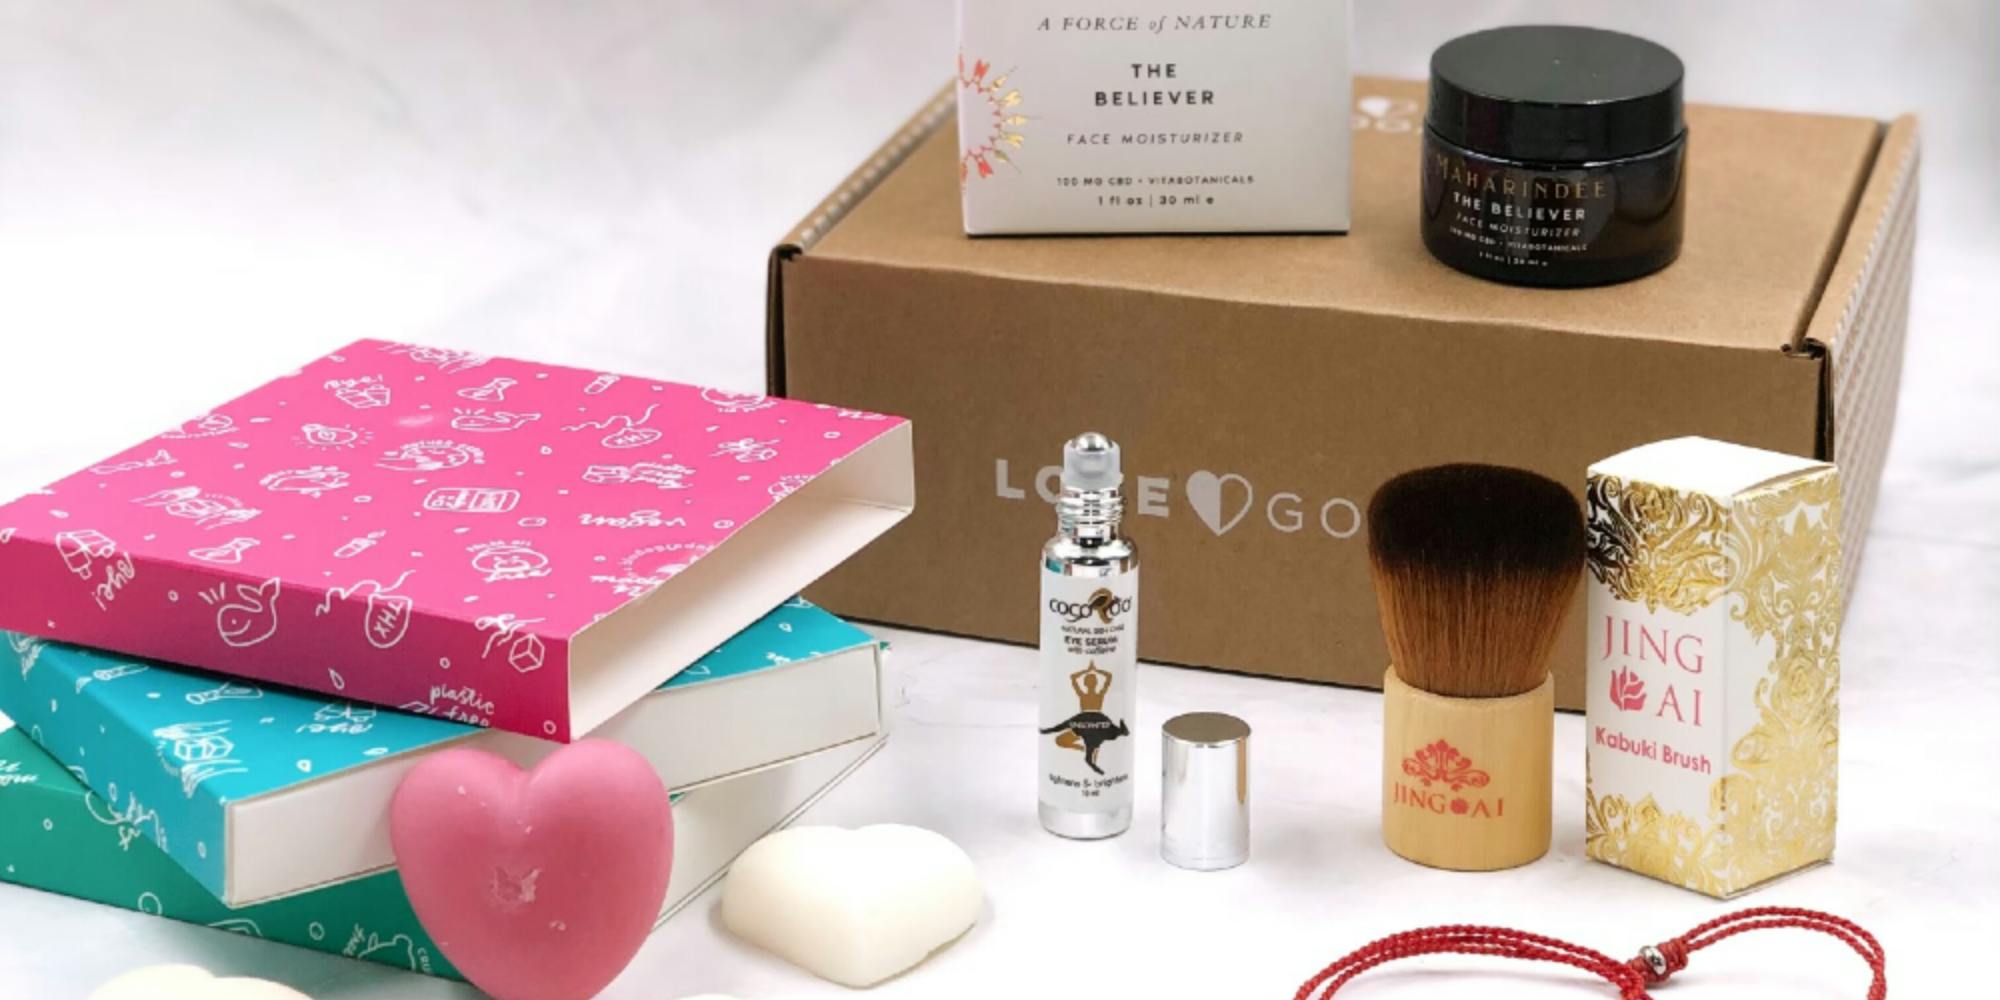 LoveGoodly's cruelty-free beauty products come in an eco subscription box